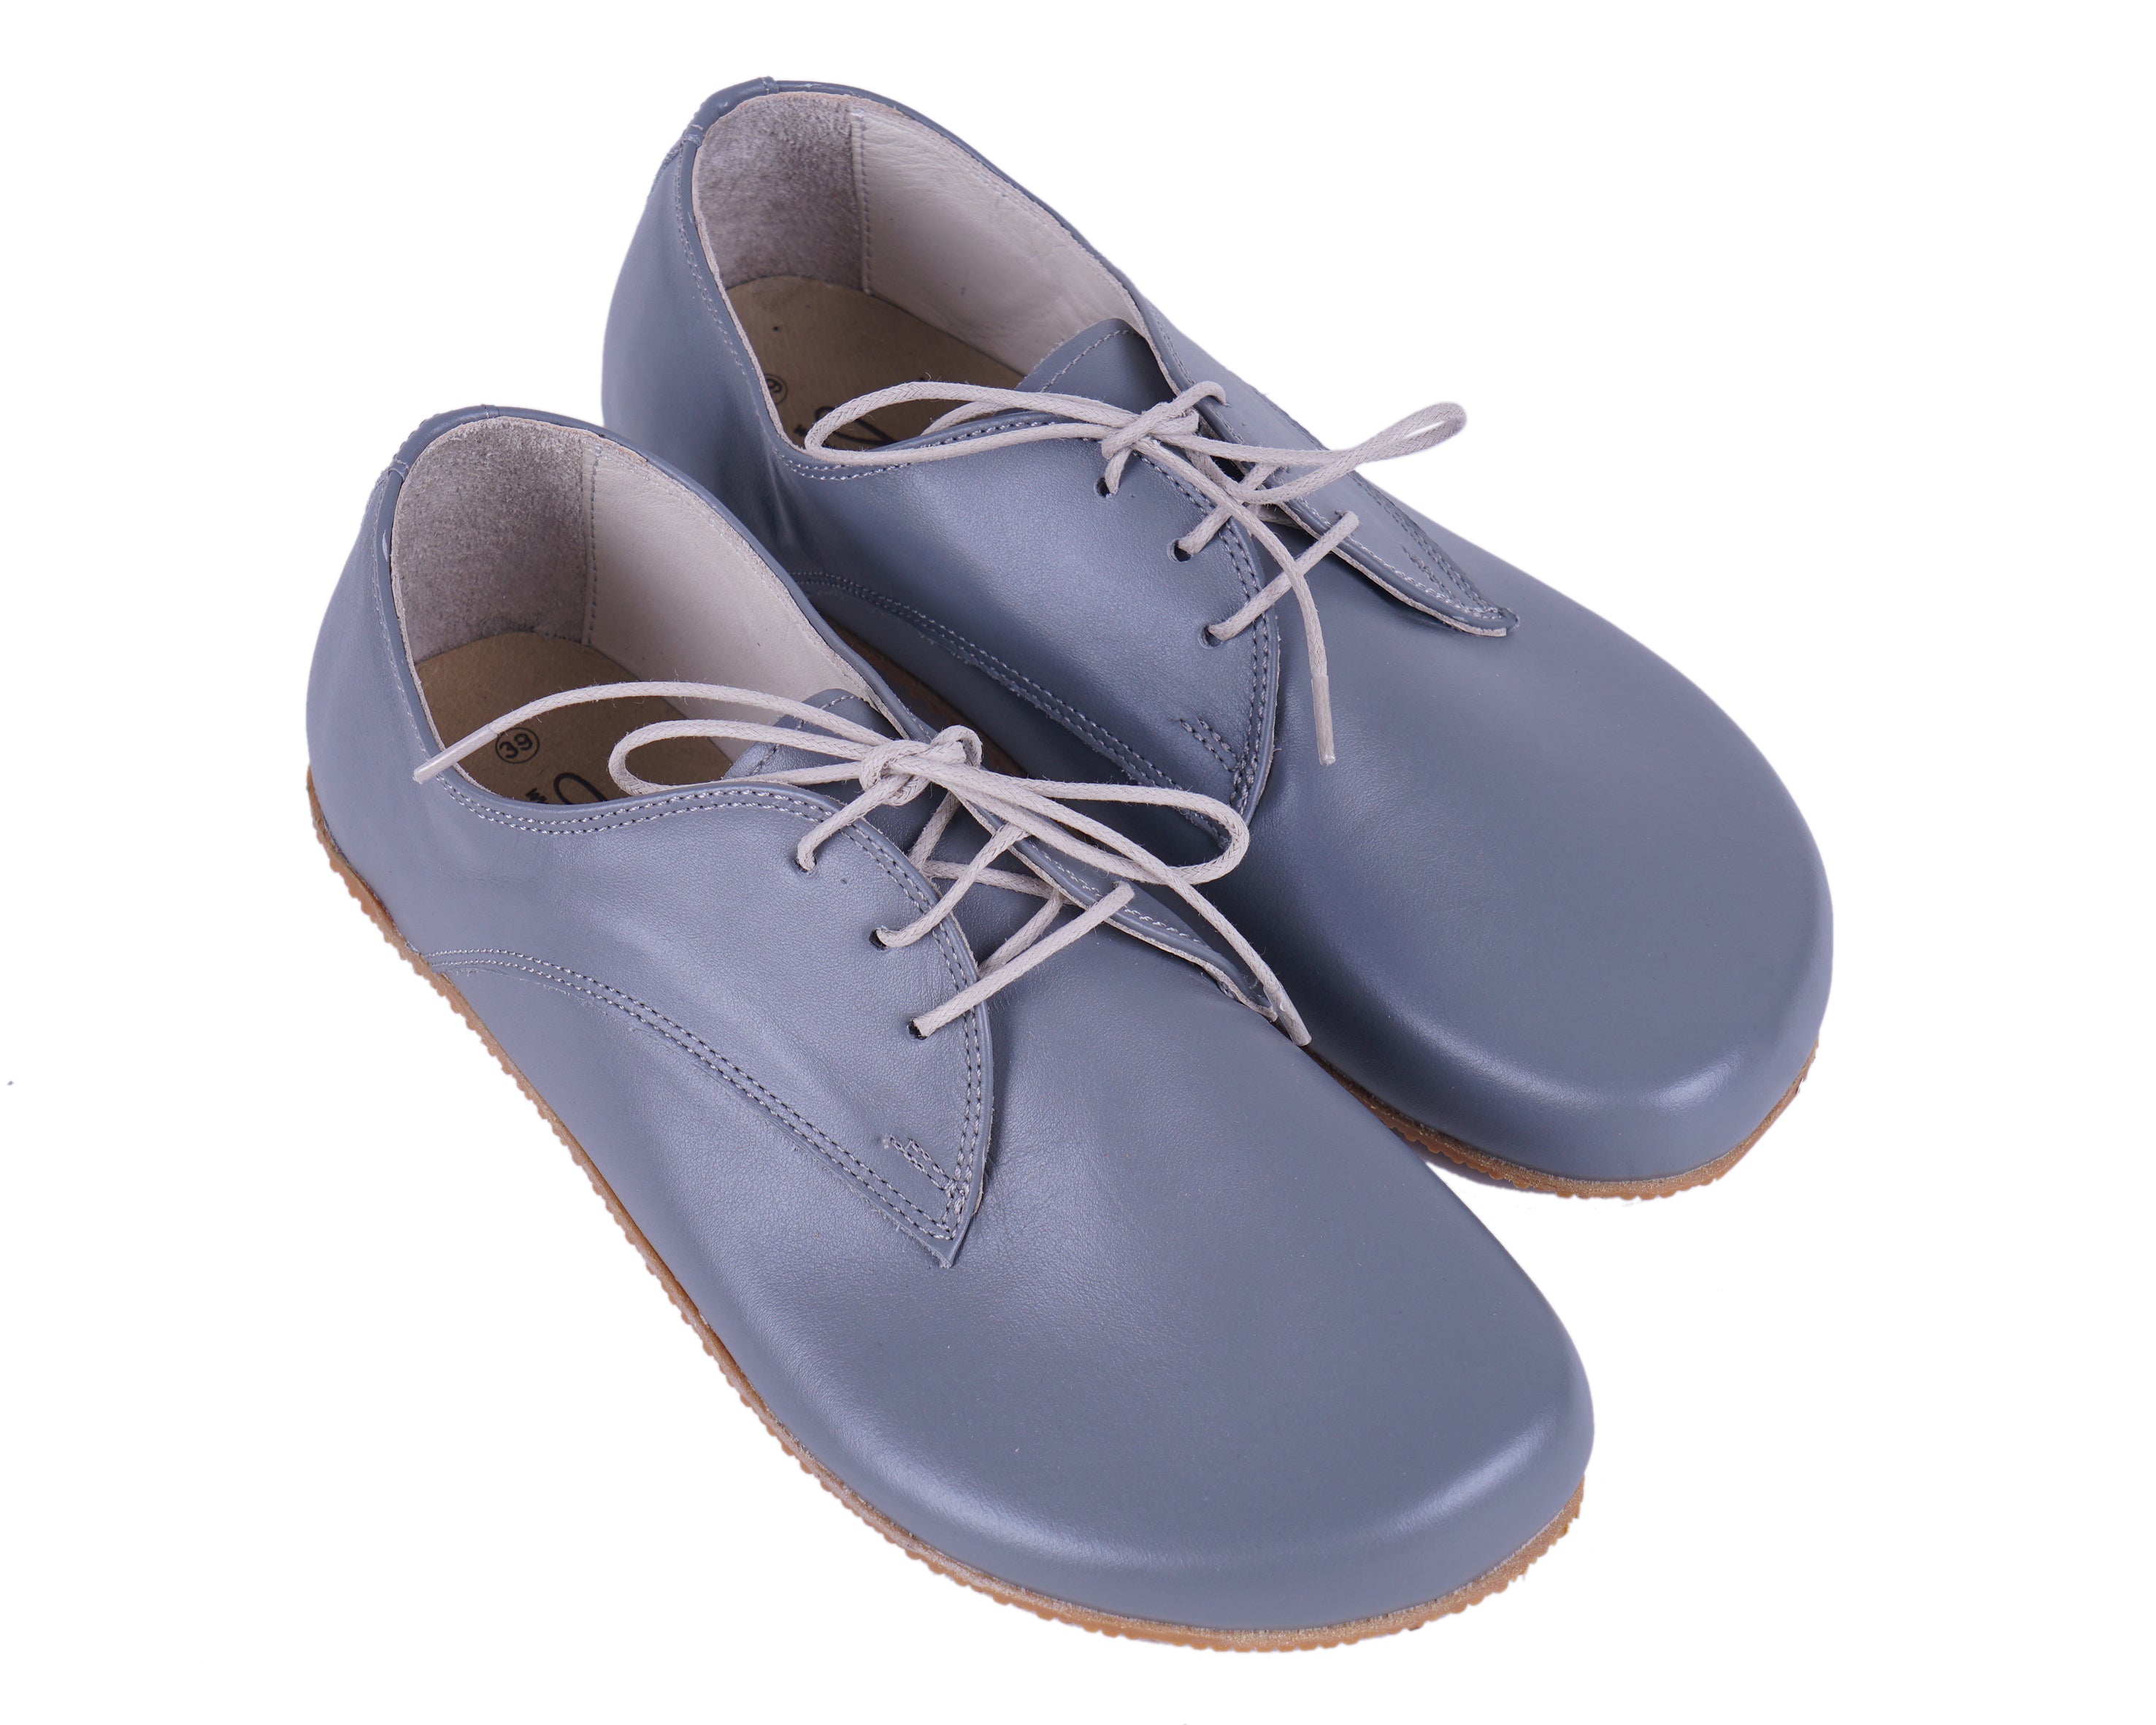 Gray Oxford Wide Barefoot Shoes Smooth Leather Handmade 4mm Rubber Outsole